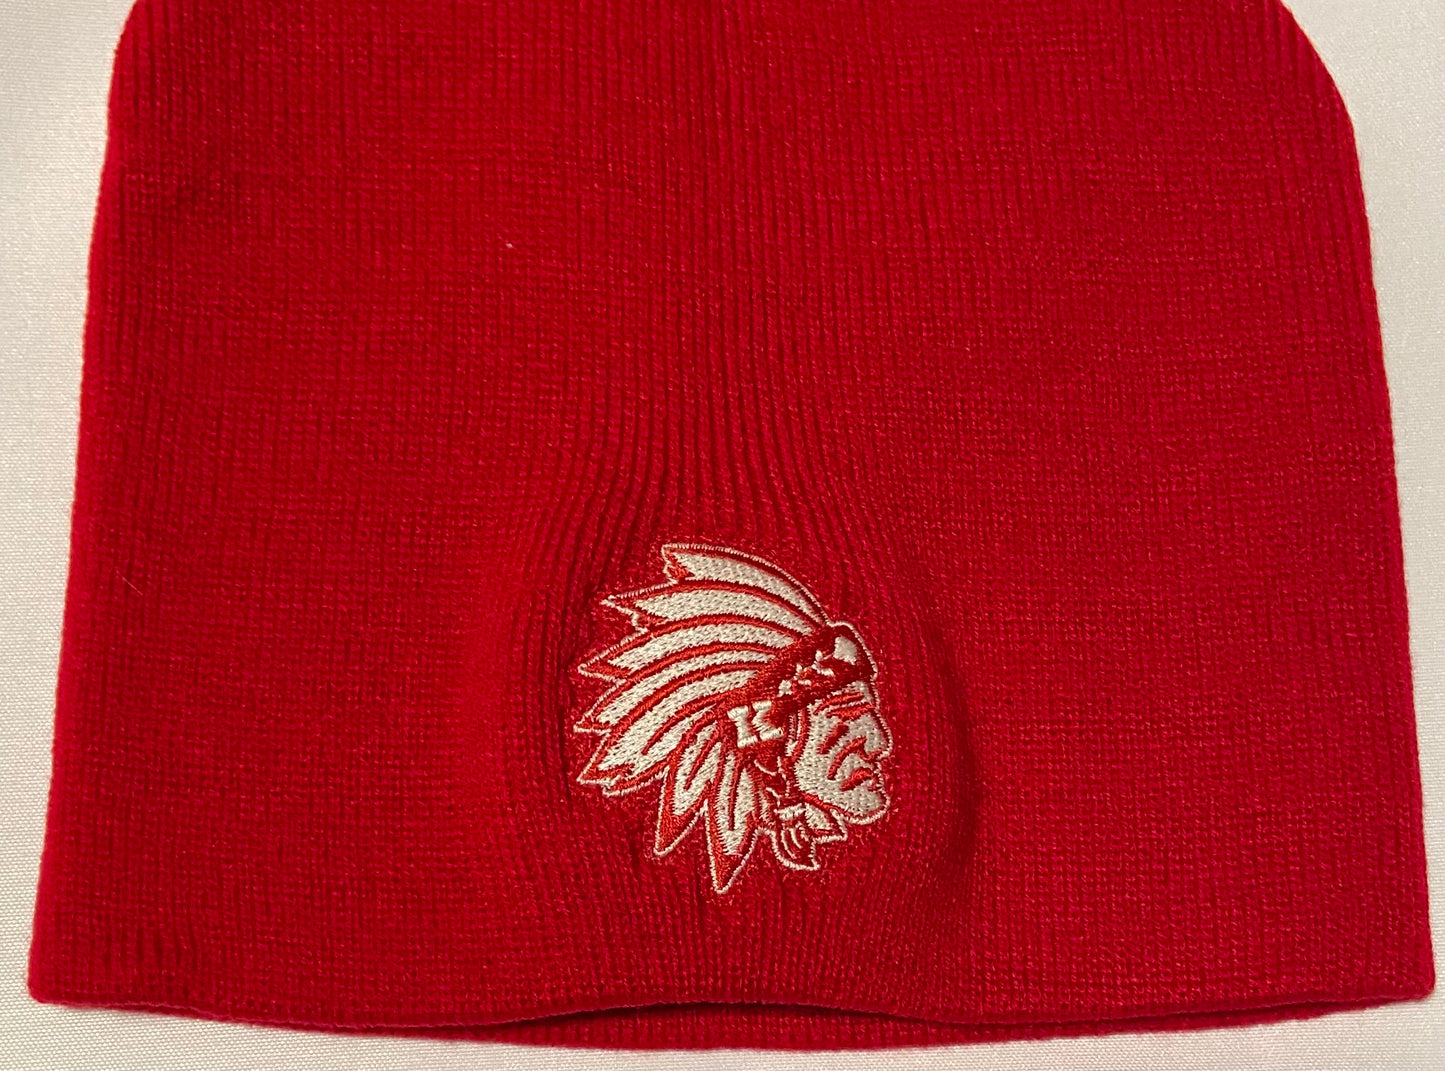 Knox Redskins Embroidered Logo Beanie - Red - Winter Hat